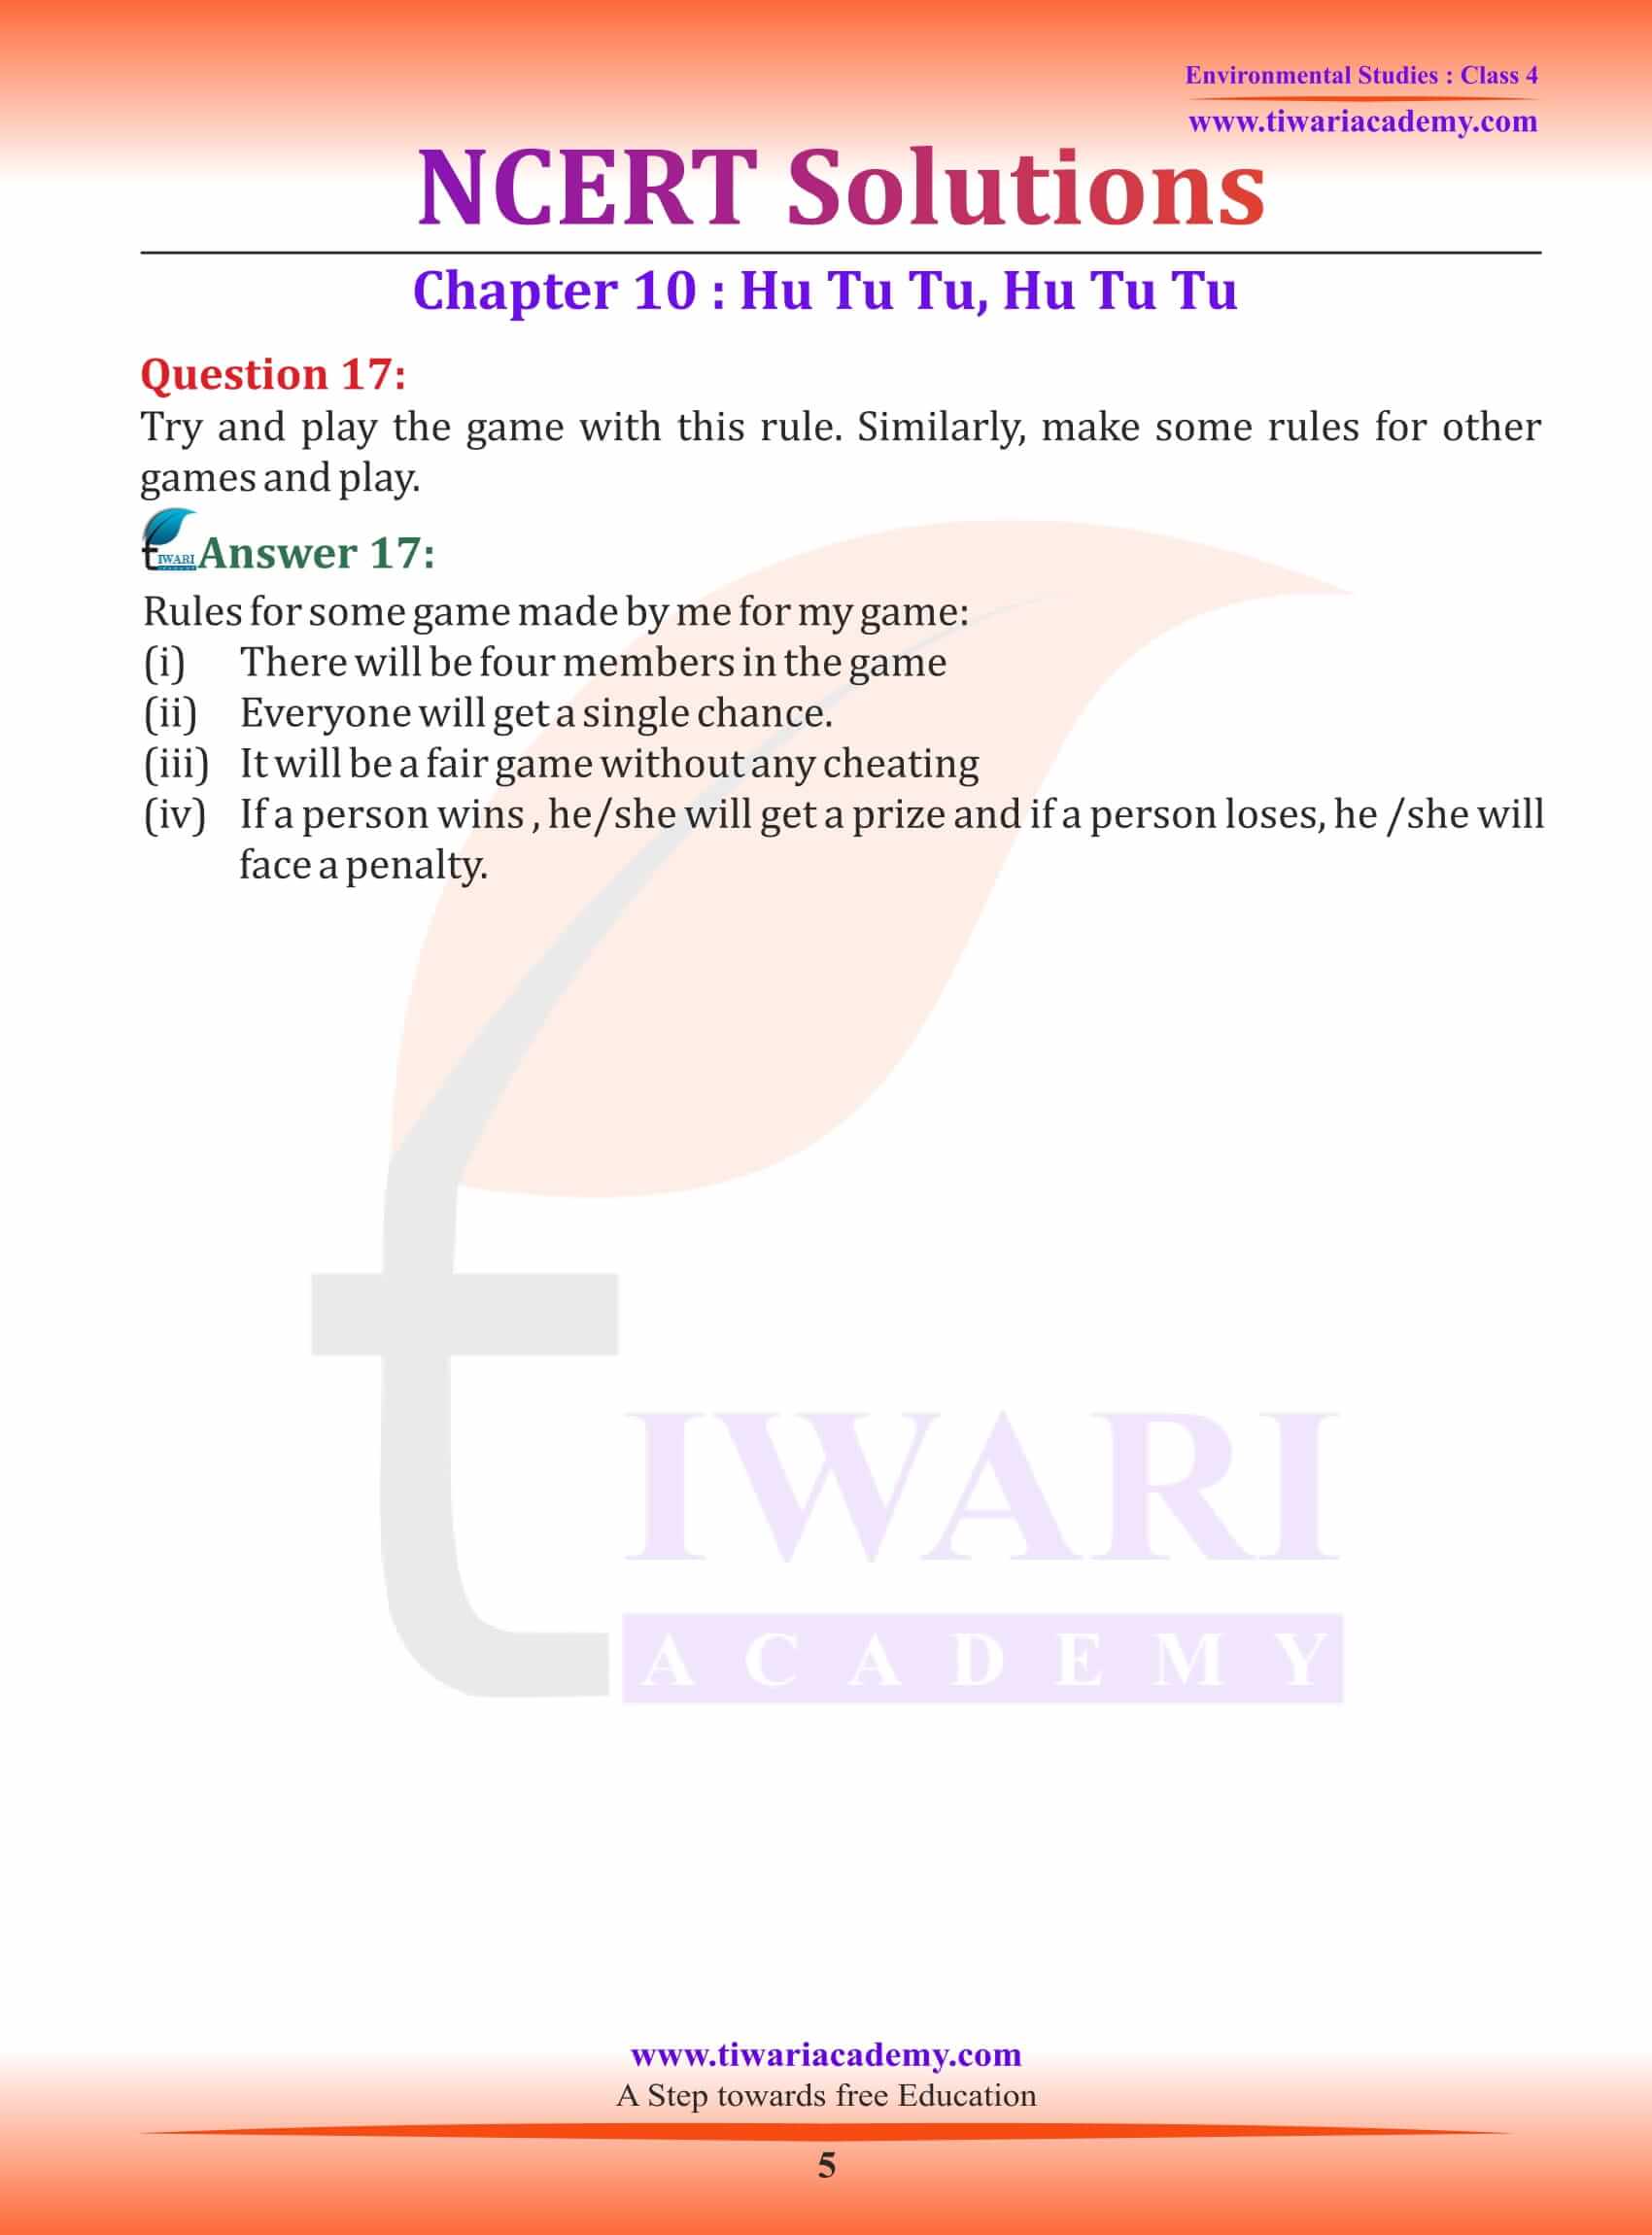 NCERT Solutions for Class 4 EVS Chapter 10 in English Medium